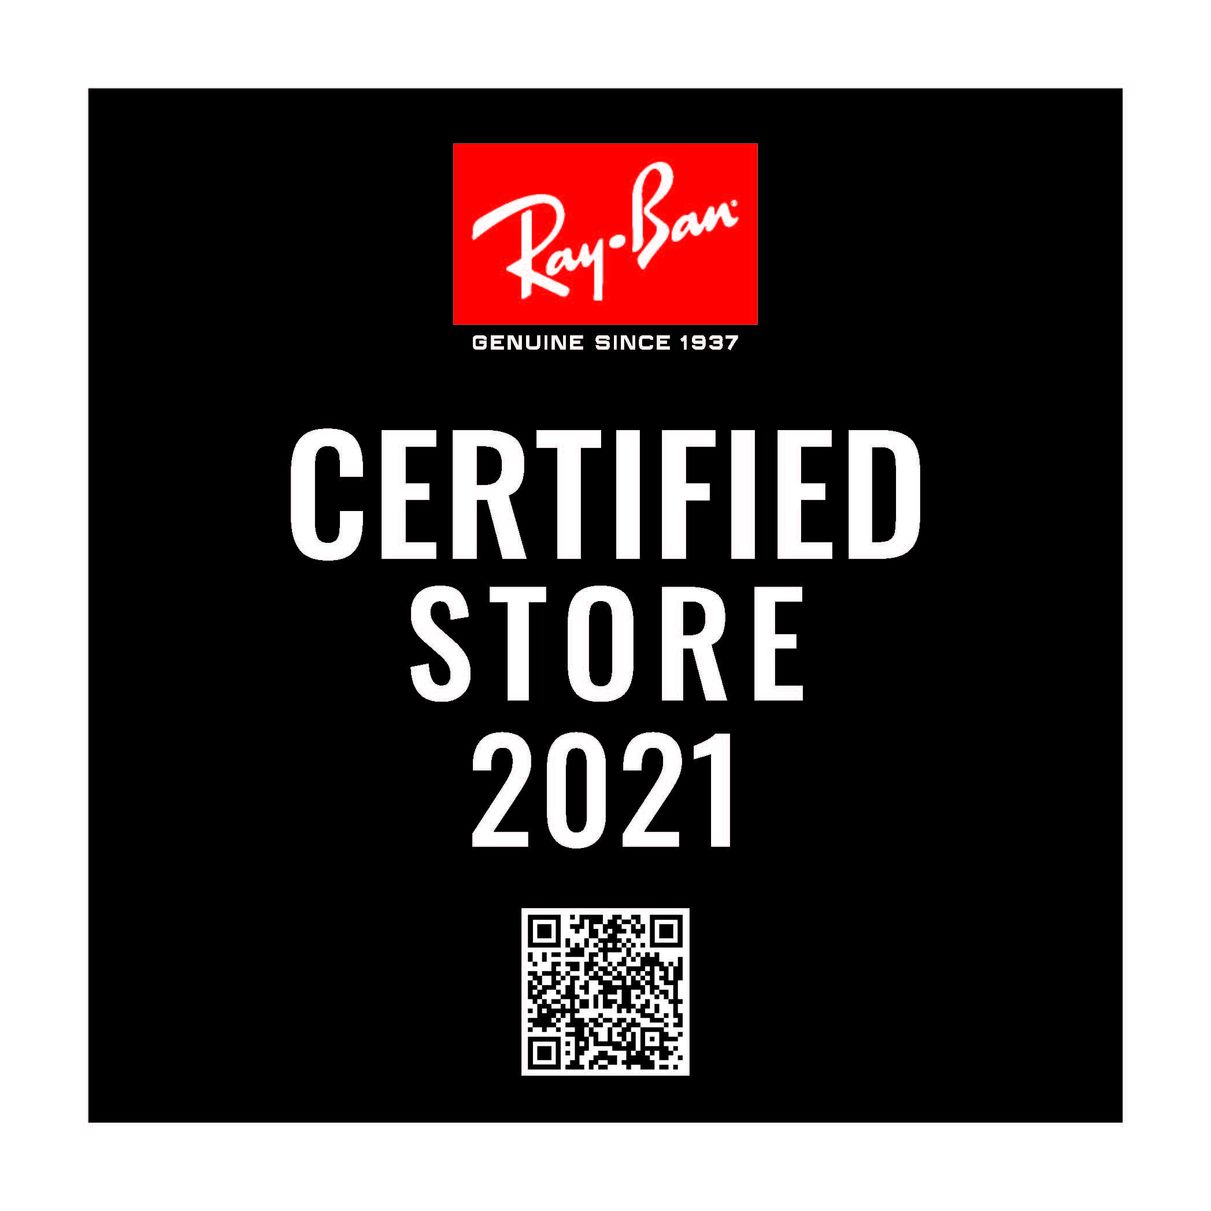 Ray Ban Certified Store 2021